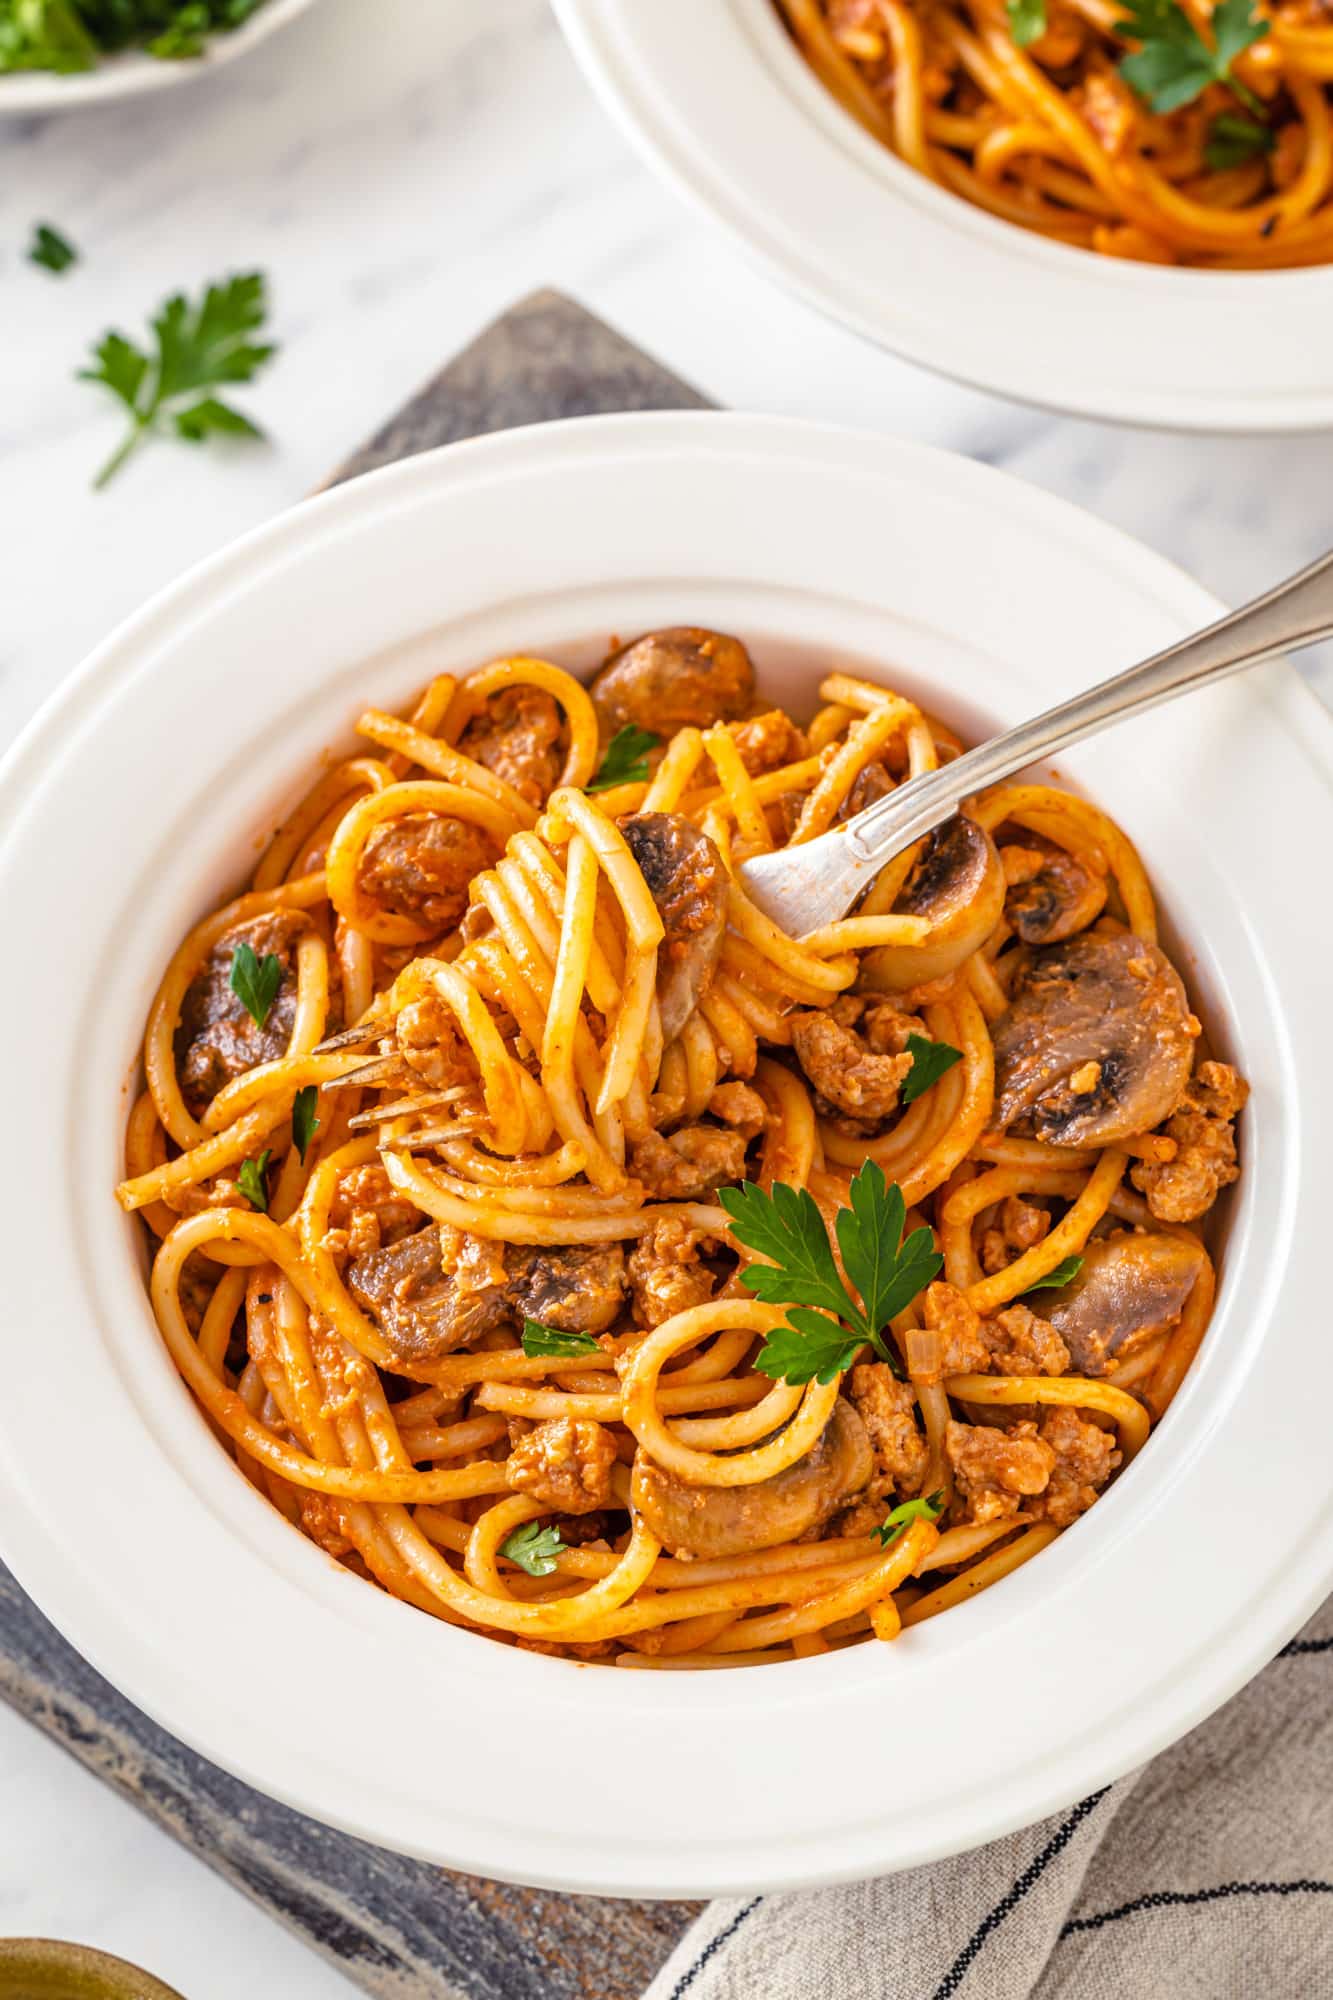 beef-spaghetti-in-a-white-bowl-with-a-fork-on-a-wooden-board-with-a-towel-on-the-side